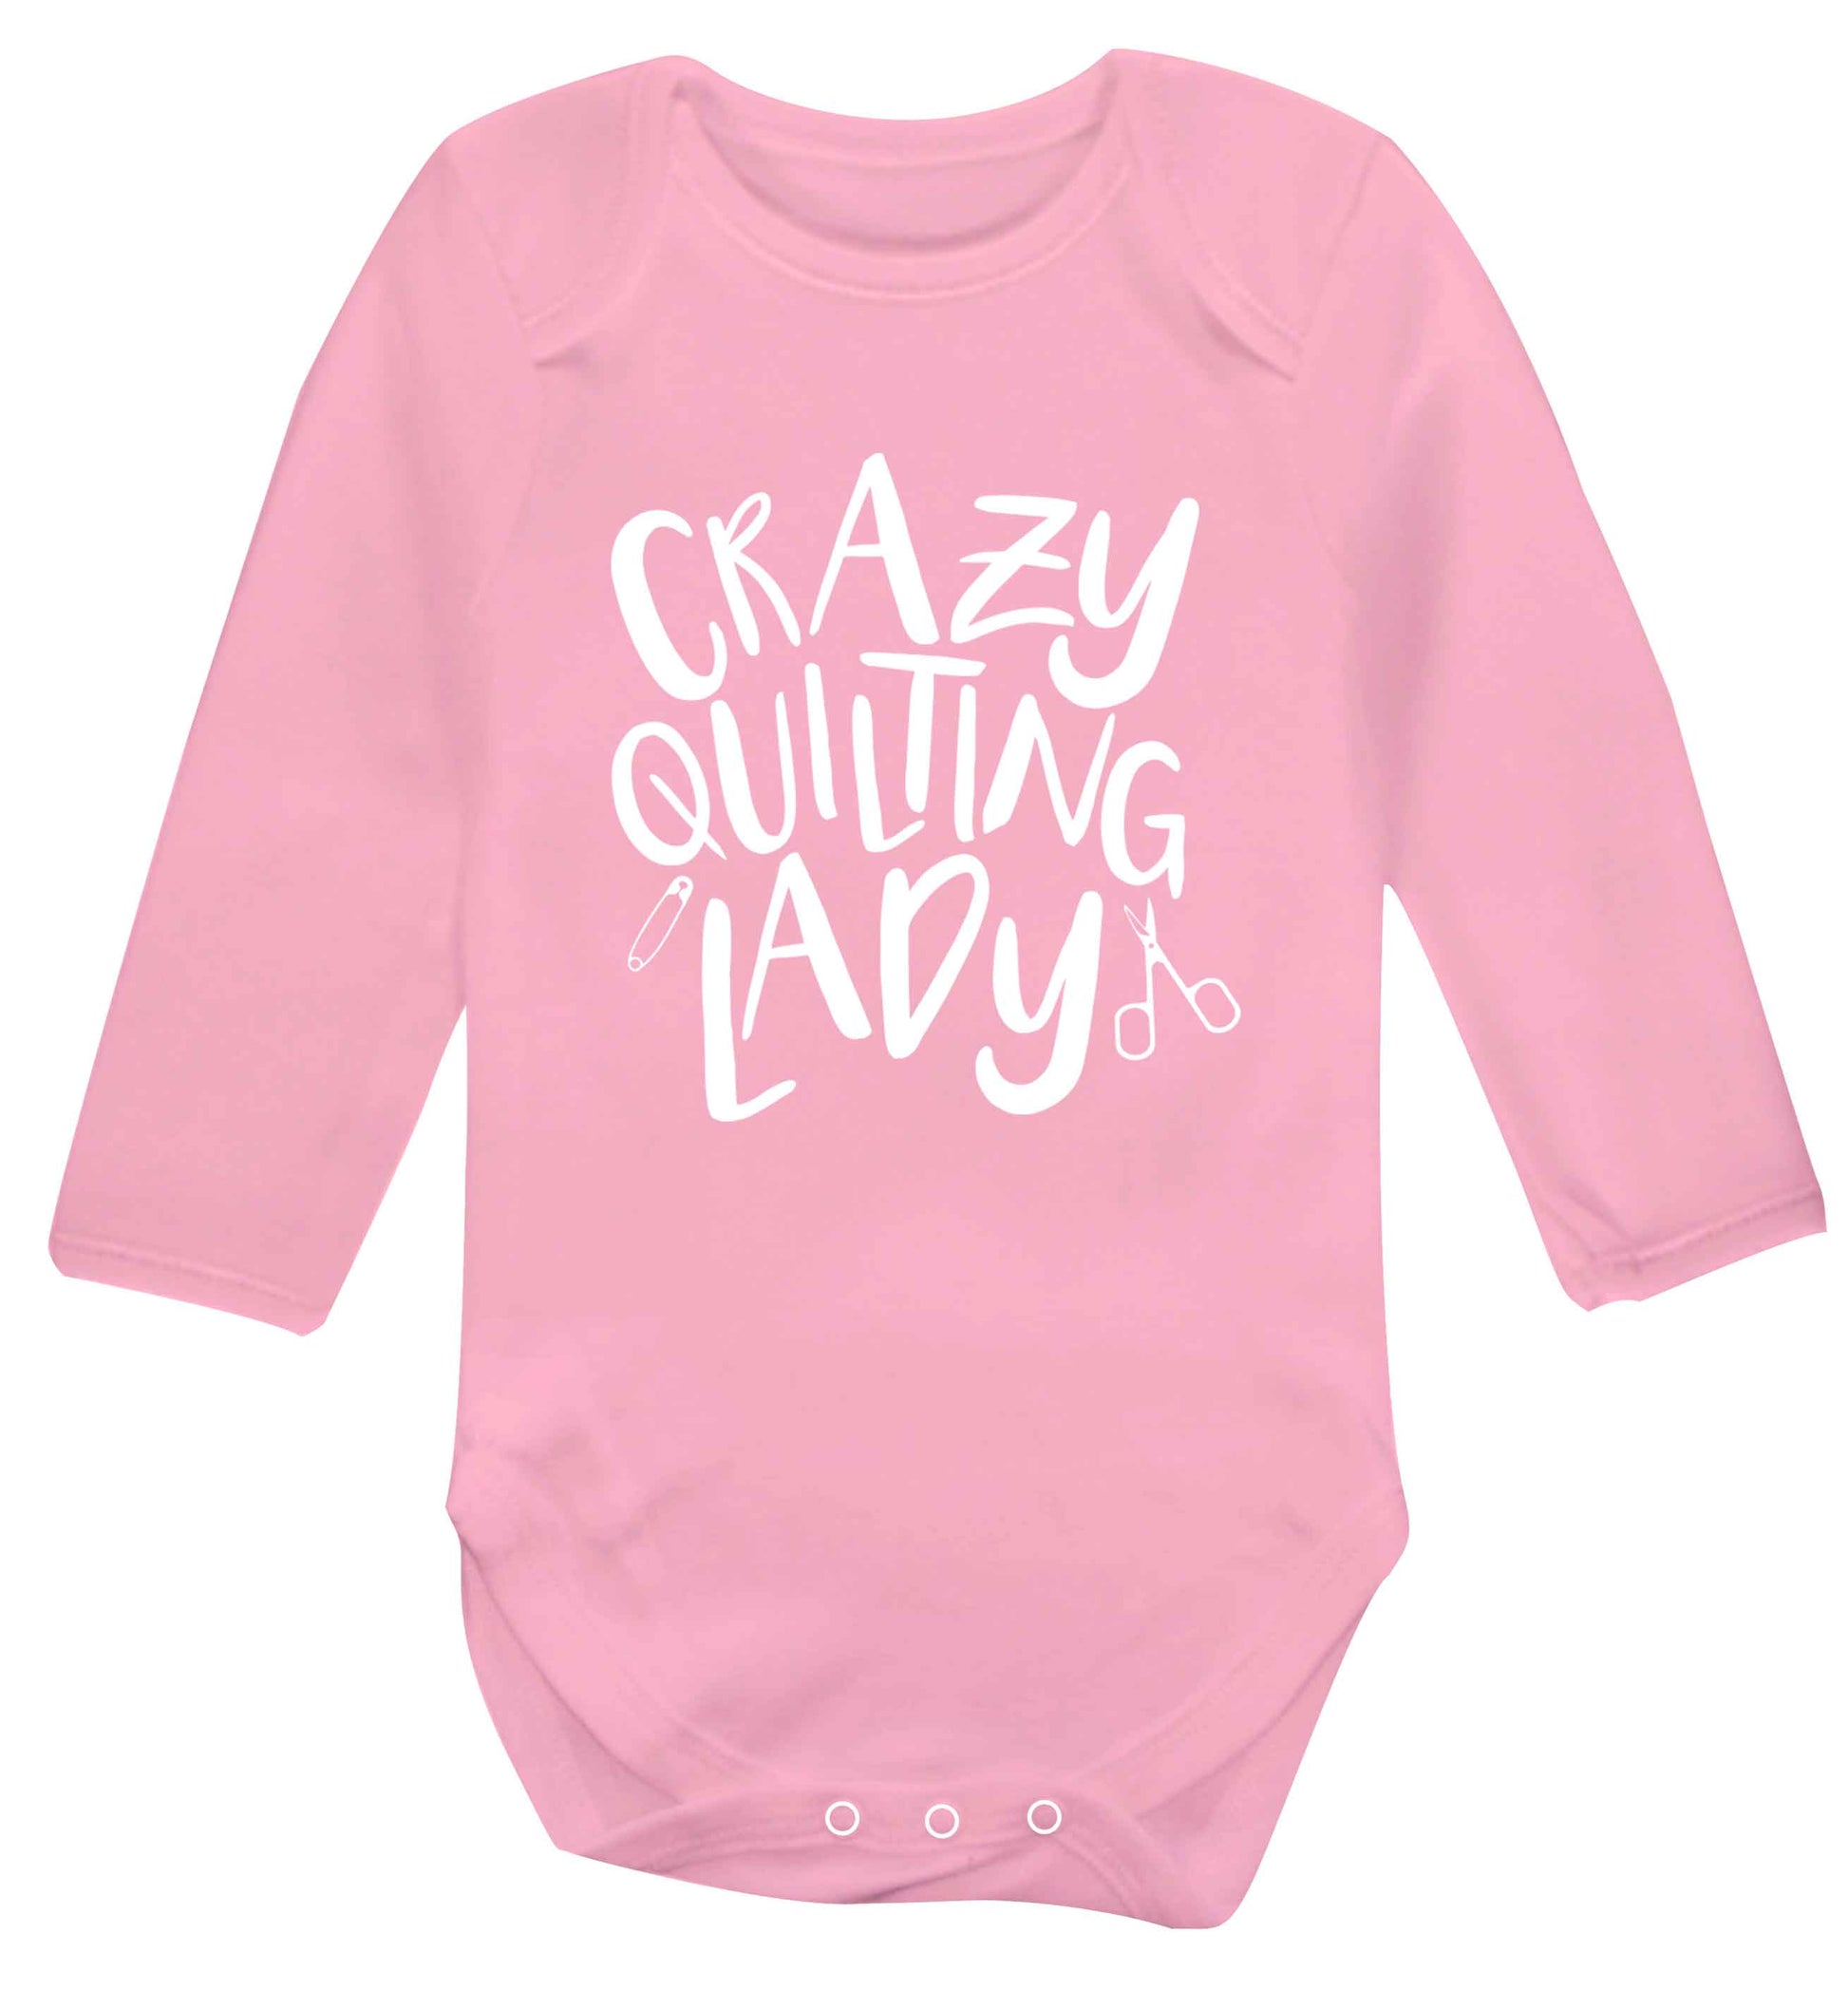 Crazy quilting lady Baby Vest long sleeved pale pink 6-12 months